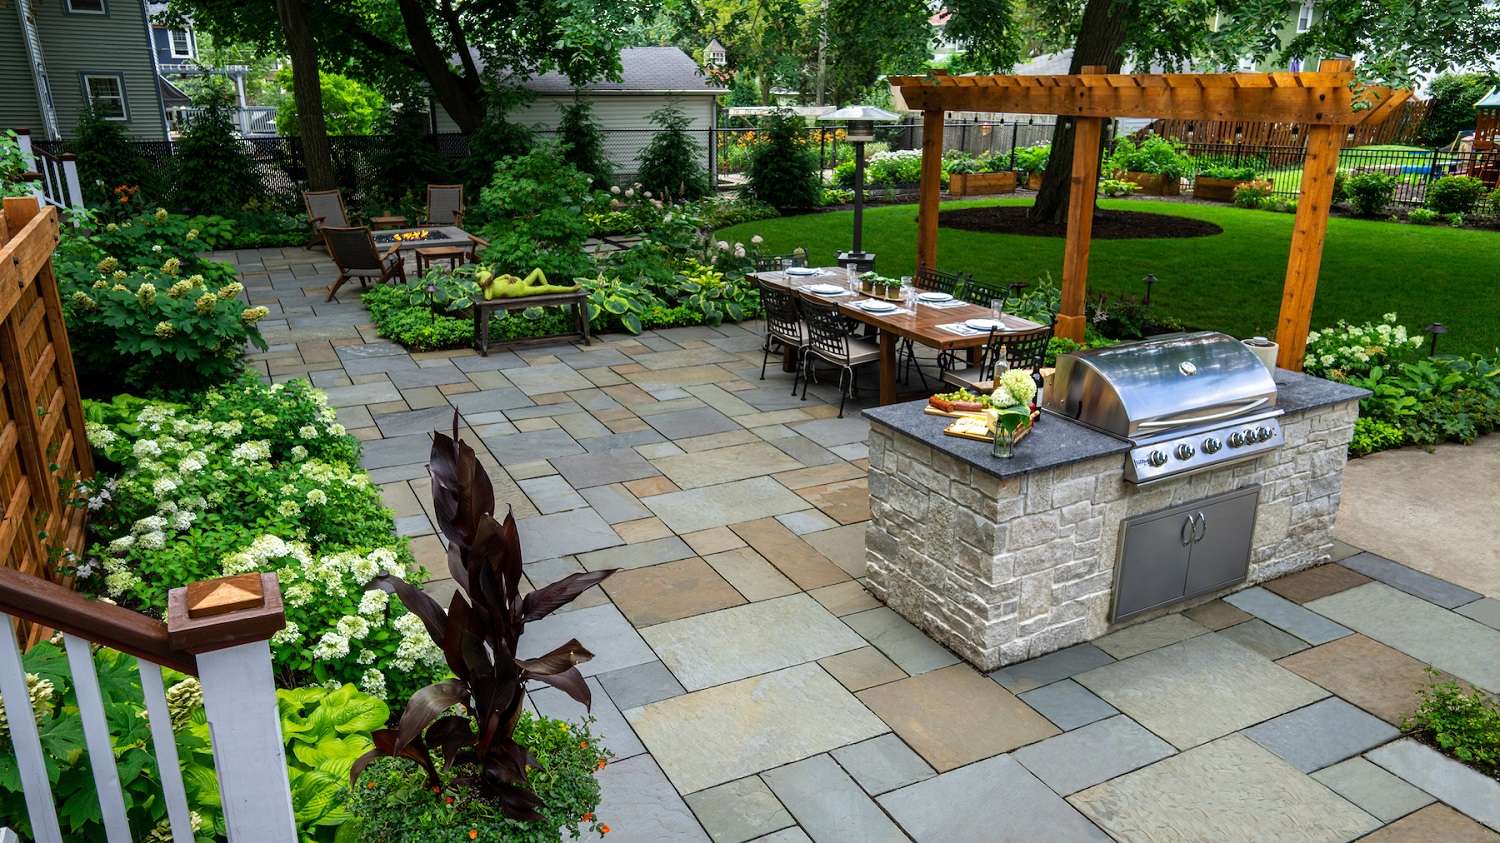 The Pros and Cons of Bluestone When Searching for Landscape